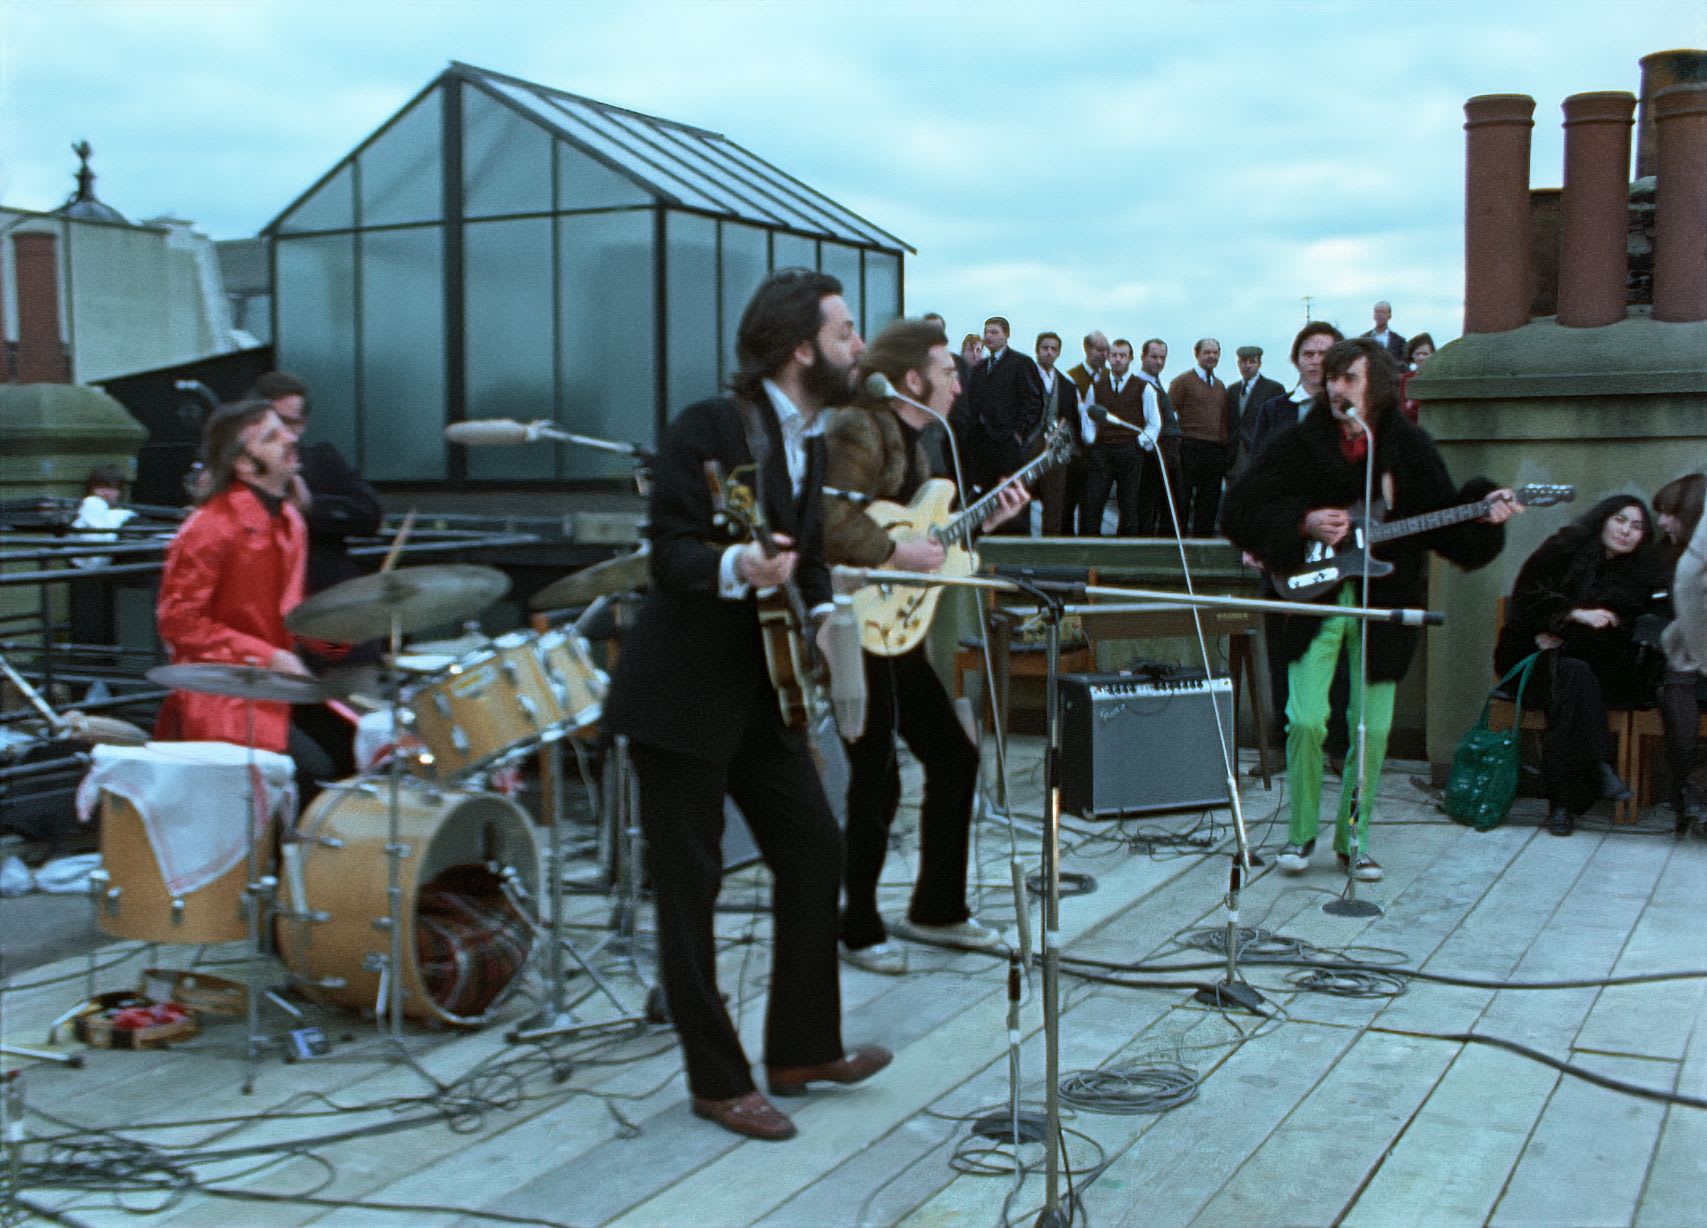 The Beatles: Get Back — The Rooftop Concert To Premiere In IMAX Theatres In February